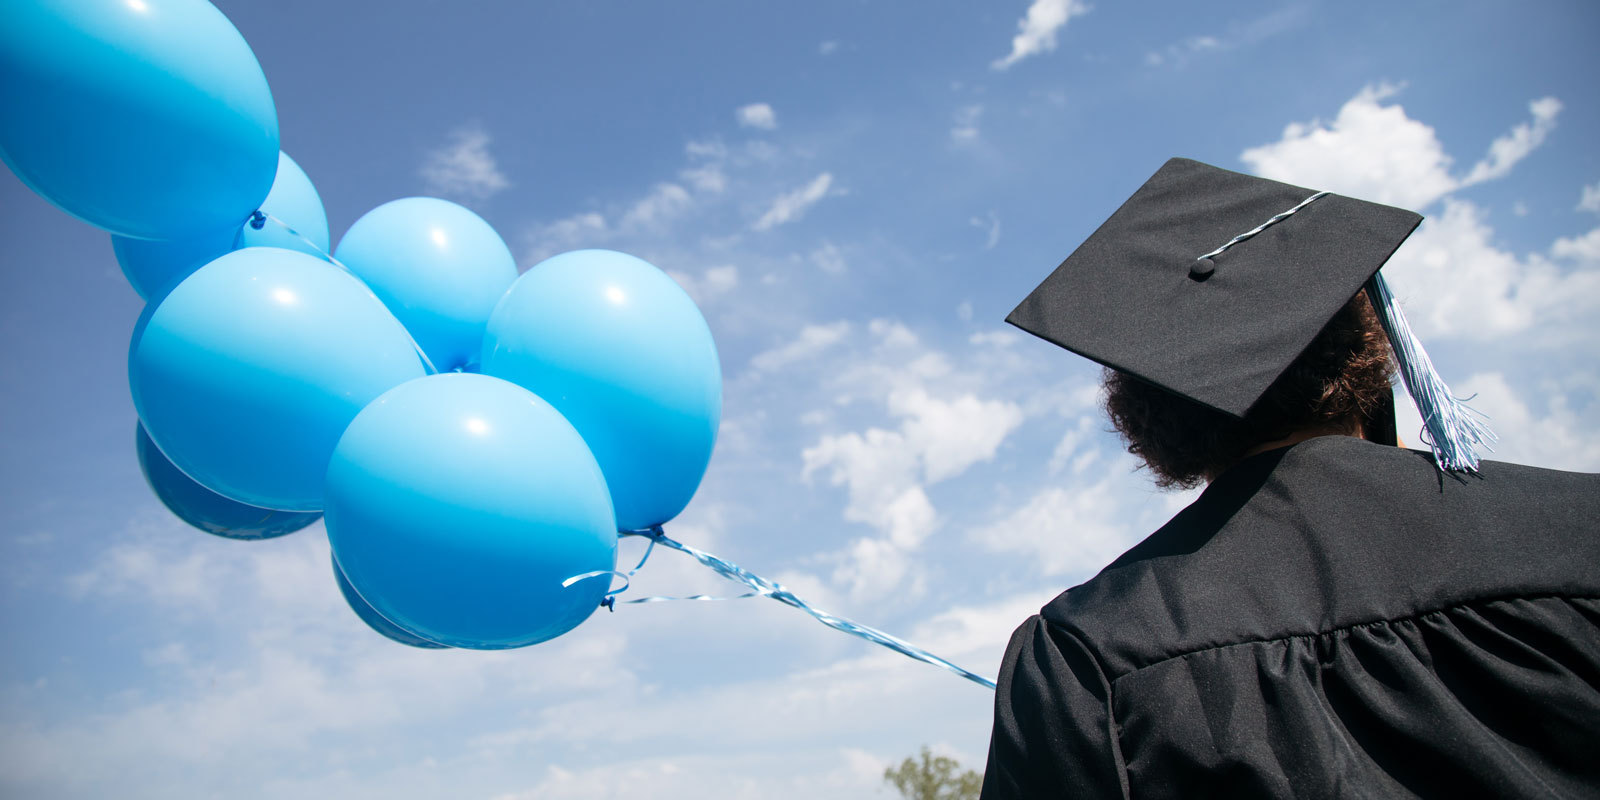 Graduate in cap and gown stands outside with blue balloons